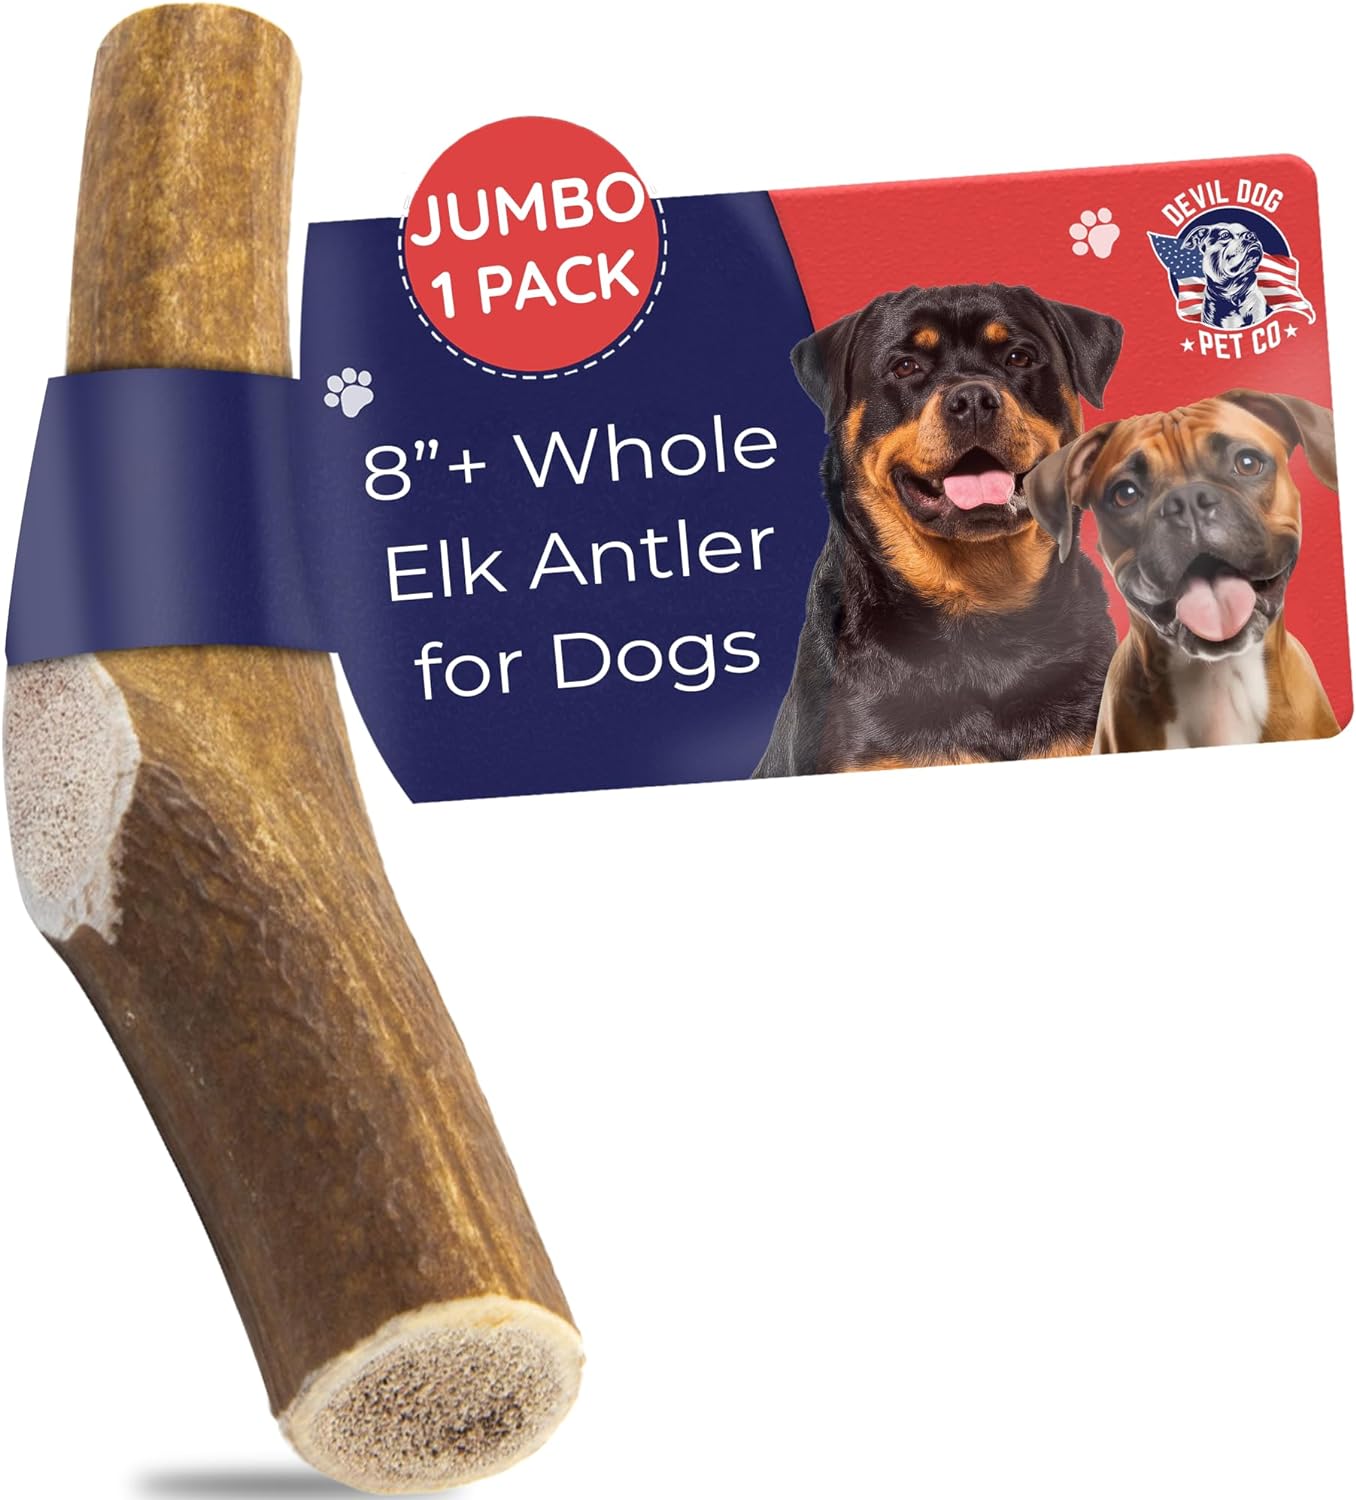 Devil Dog Pet Co. Elk Antlers for Dogs, 1 Pack, Jumbo 8”+ – Grade A Long Lasting Dog Bones for Aggressive Chewers, Premium USA Naturally Shed Antler Dog Chew – Healthy, No Odor, Dog Antler Chews